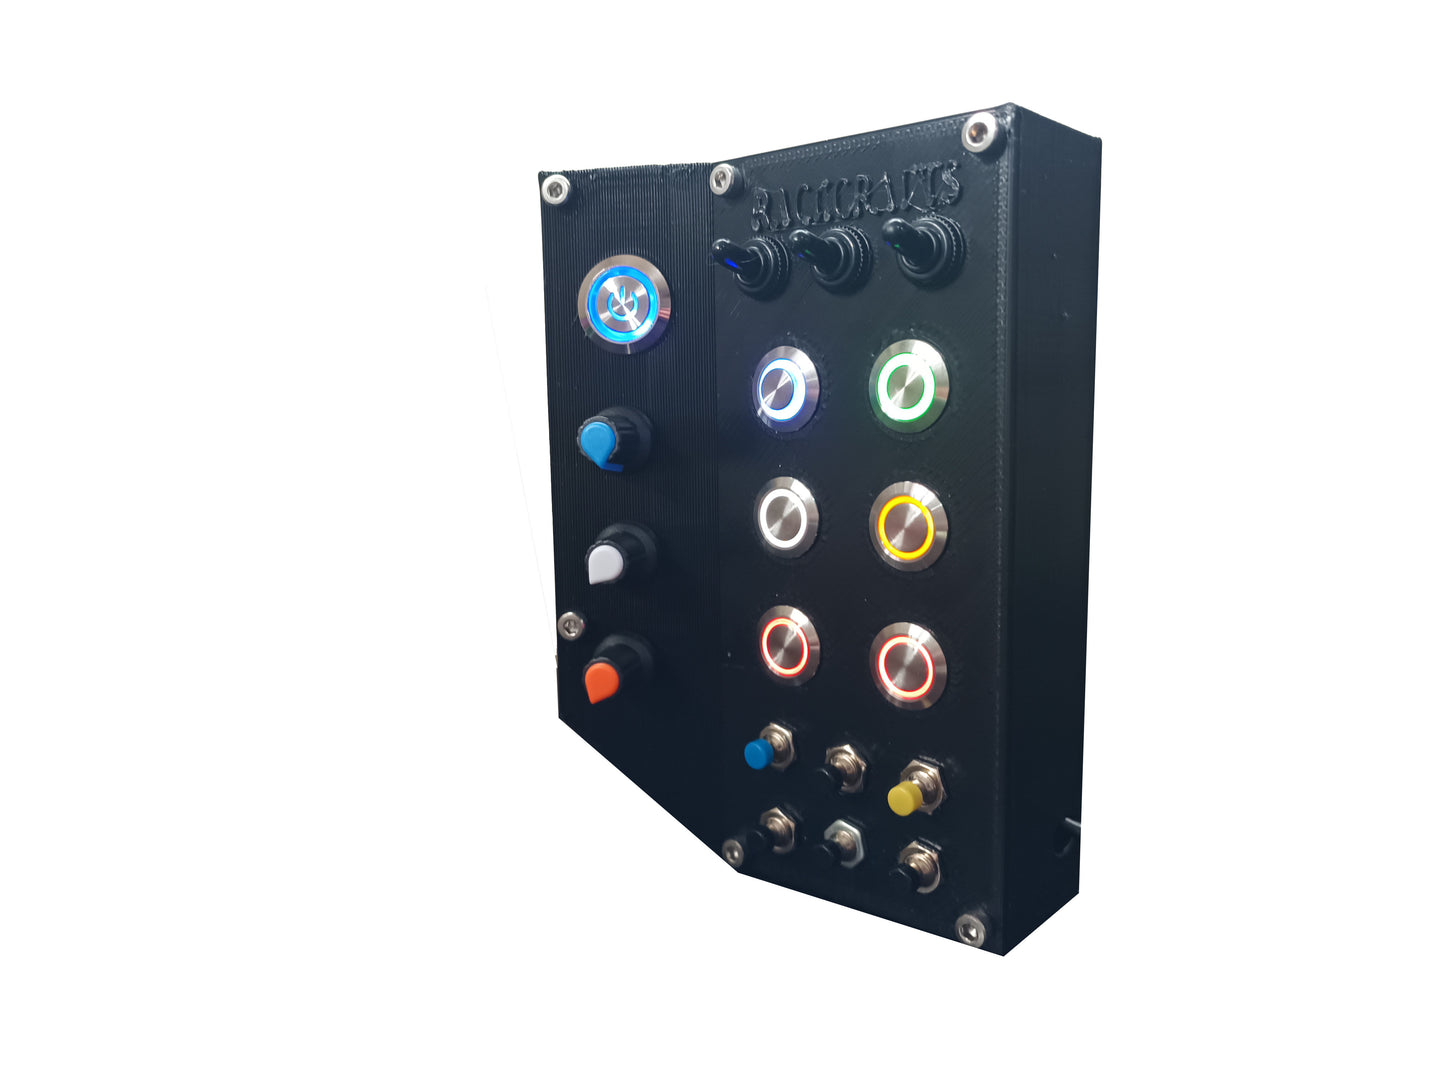 Racecrafts NZ Sim Angled LED Button Box/Controller Console, 12x Push Buttons, 3 Toggle Switches, 3x Potentiometers